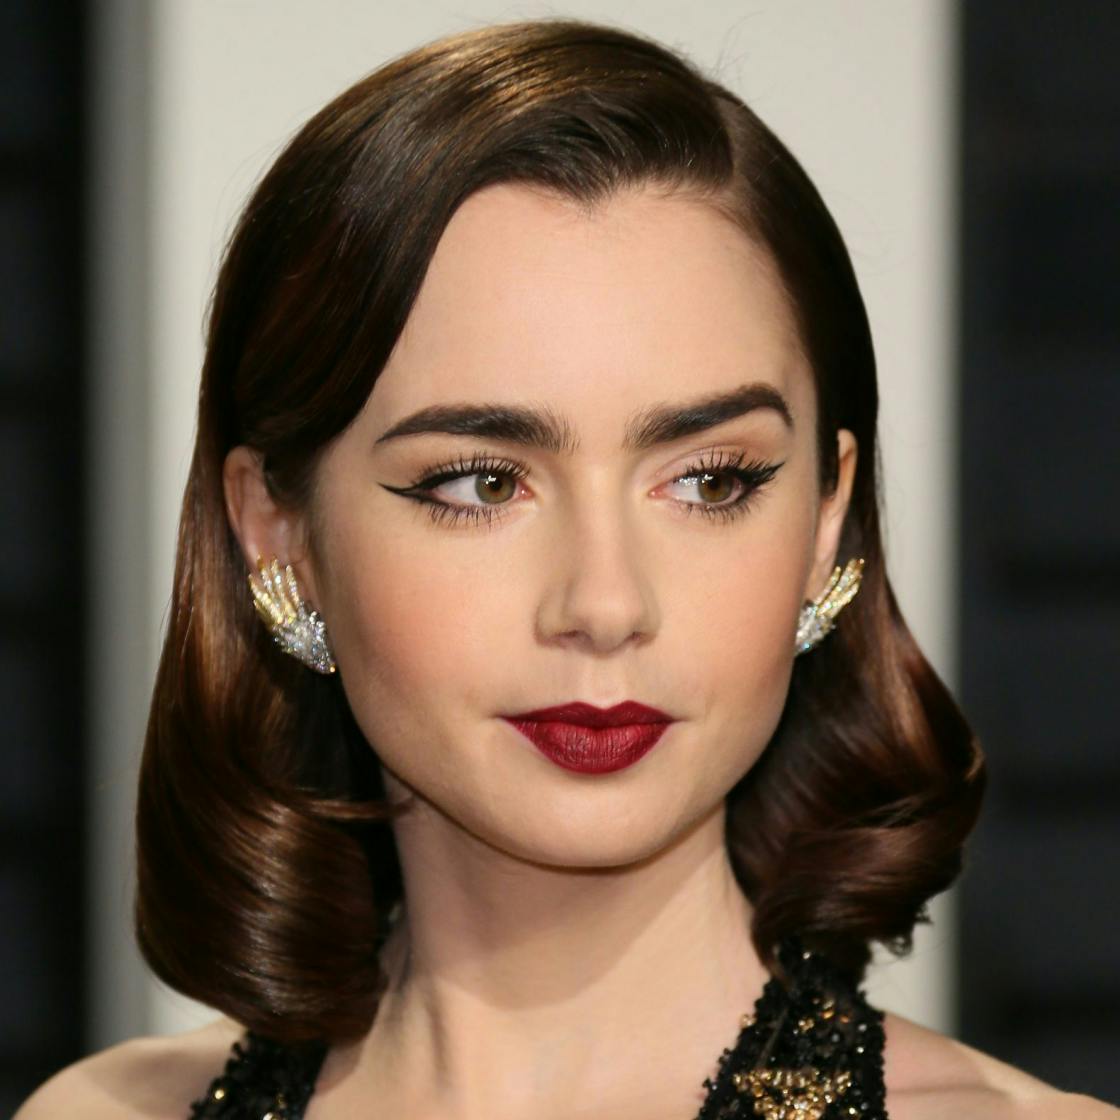 How to wear dark lipstick (and have it look fantastic)